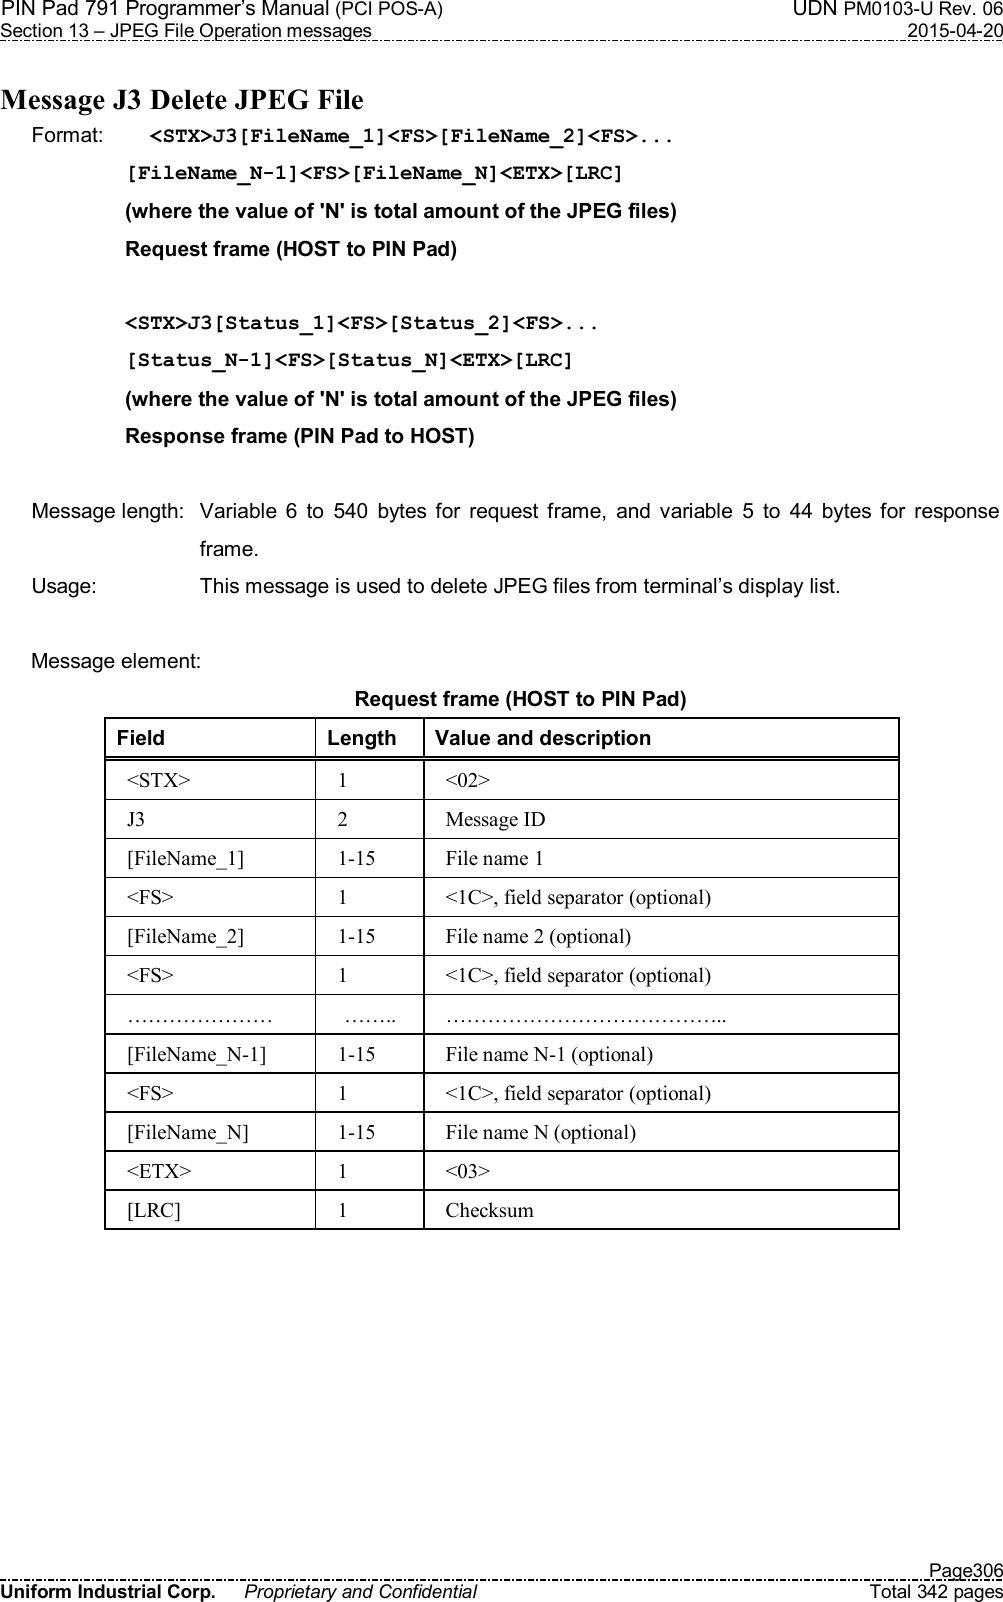 PIN Pad 791 Programmer’s Manual (PCI POS-A)  UDN PM0103-U Rev. 06 Section 13 – JPEG File Operation messages  2015-04-20   Page306 Uniform Industrial Corp.  Proprietary and Confidential  Total 342 pages  Message J3 Delete JPEG File Format:  &lt;STX&gt;J3[FileName_1]&lt;FS&gt;[FileName_2]&lt;FS&gt;... [FileName_N-1]&lt;FS&gt;[FileName_N]&lt;ETX&gt;[LRC] (where the value of &apos;N&apos; is total amount of the JPEG files) Request frame (HOST to PIN Pad)  &lt;STX&gt;J3[Status_1]&lt;FS&gt;[Status_2]&lt;FS&gt;... [Status_N-1]&lt;FS&gt;[Status_N]&lt;ETX&gt;[LRC] (where the value of &apos;N&apos; is total amount of the JPEG files) Response frame (PIN Pad to HOST)  Message length:  Variable  6  to  540  bytes  for  request  frame,  and  variable  5  to  44  bytes  for  response frame. Usage:  This message is used to delete JPEG files from terminal’s display list.  Message element: Request frame (HOST to PIN Pad) Field  Length  Value and description &lt;STX&gt;  1  &lt;02&gt; J3  2  Message ID [FileName_1]  1-15  File name 1 &lt;FS&gt;  1  &lt;1C&gt;, field separator (optional) [FileName_2]  1-15  File name 2 (optional) &lt;FS&gt;  1  &lt;1C&gt;, field separator (optional) …………………  ……..  ………………………………….. [FileName_N-1]  1-15  File name N-1 (optional) &lt;FS&gt;  1  &lt;1C&gt;, field separator (optional) [FileName_N]  1-15  File name N (optional) &lt;ETX&gt;  1  &lt;03&gt; [LRC]  1  Checksum  